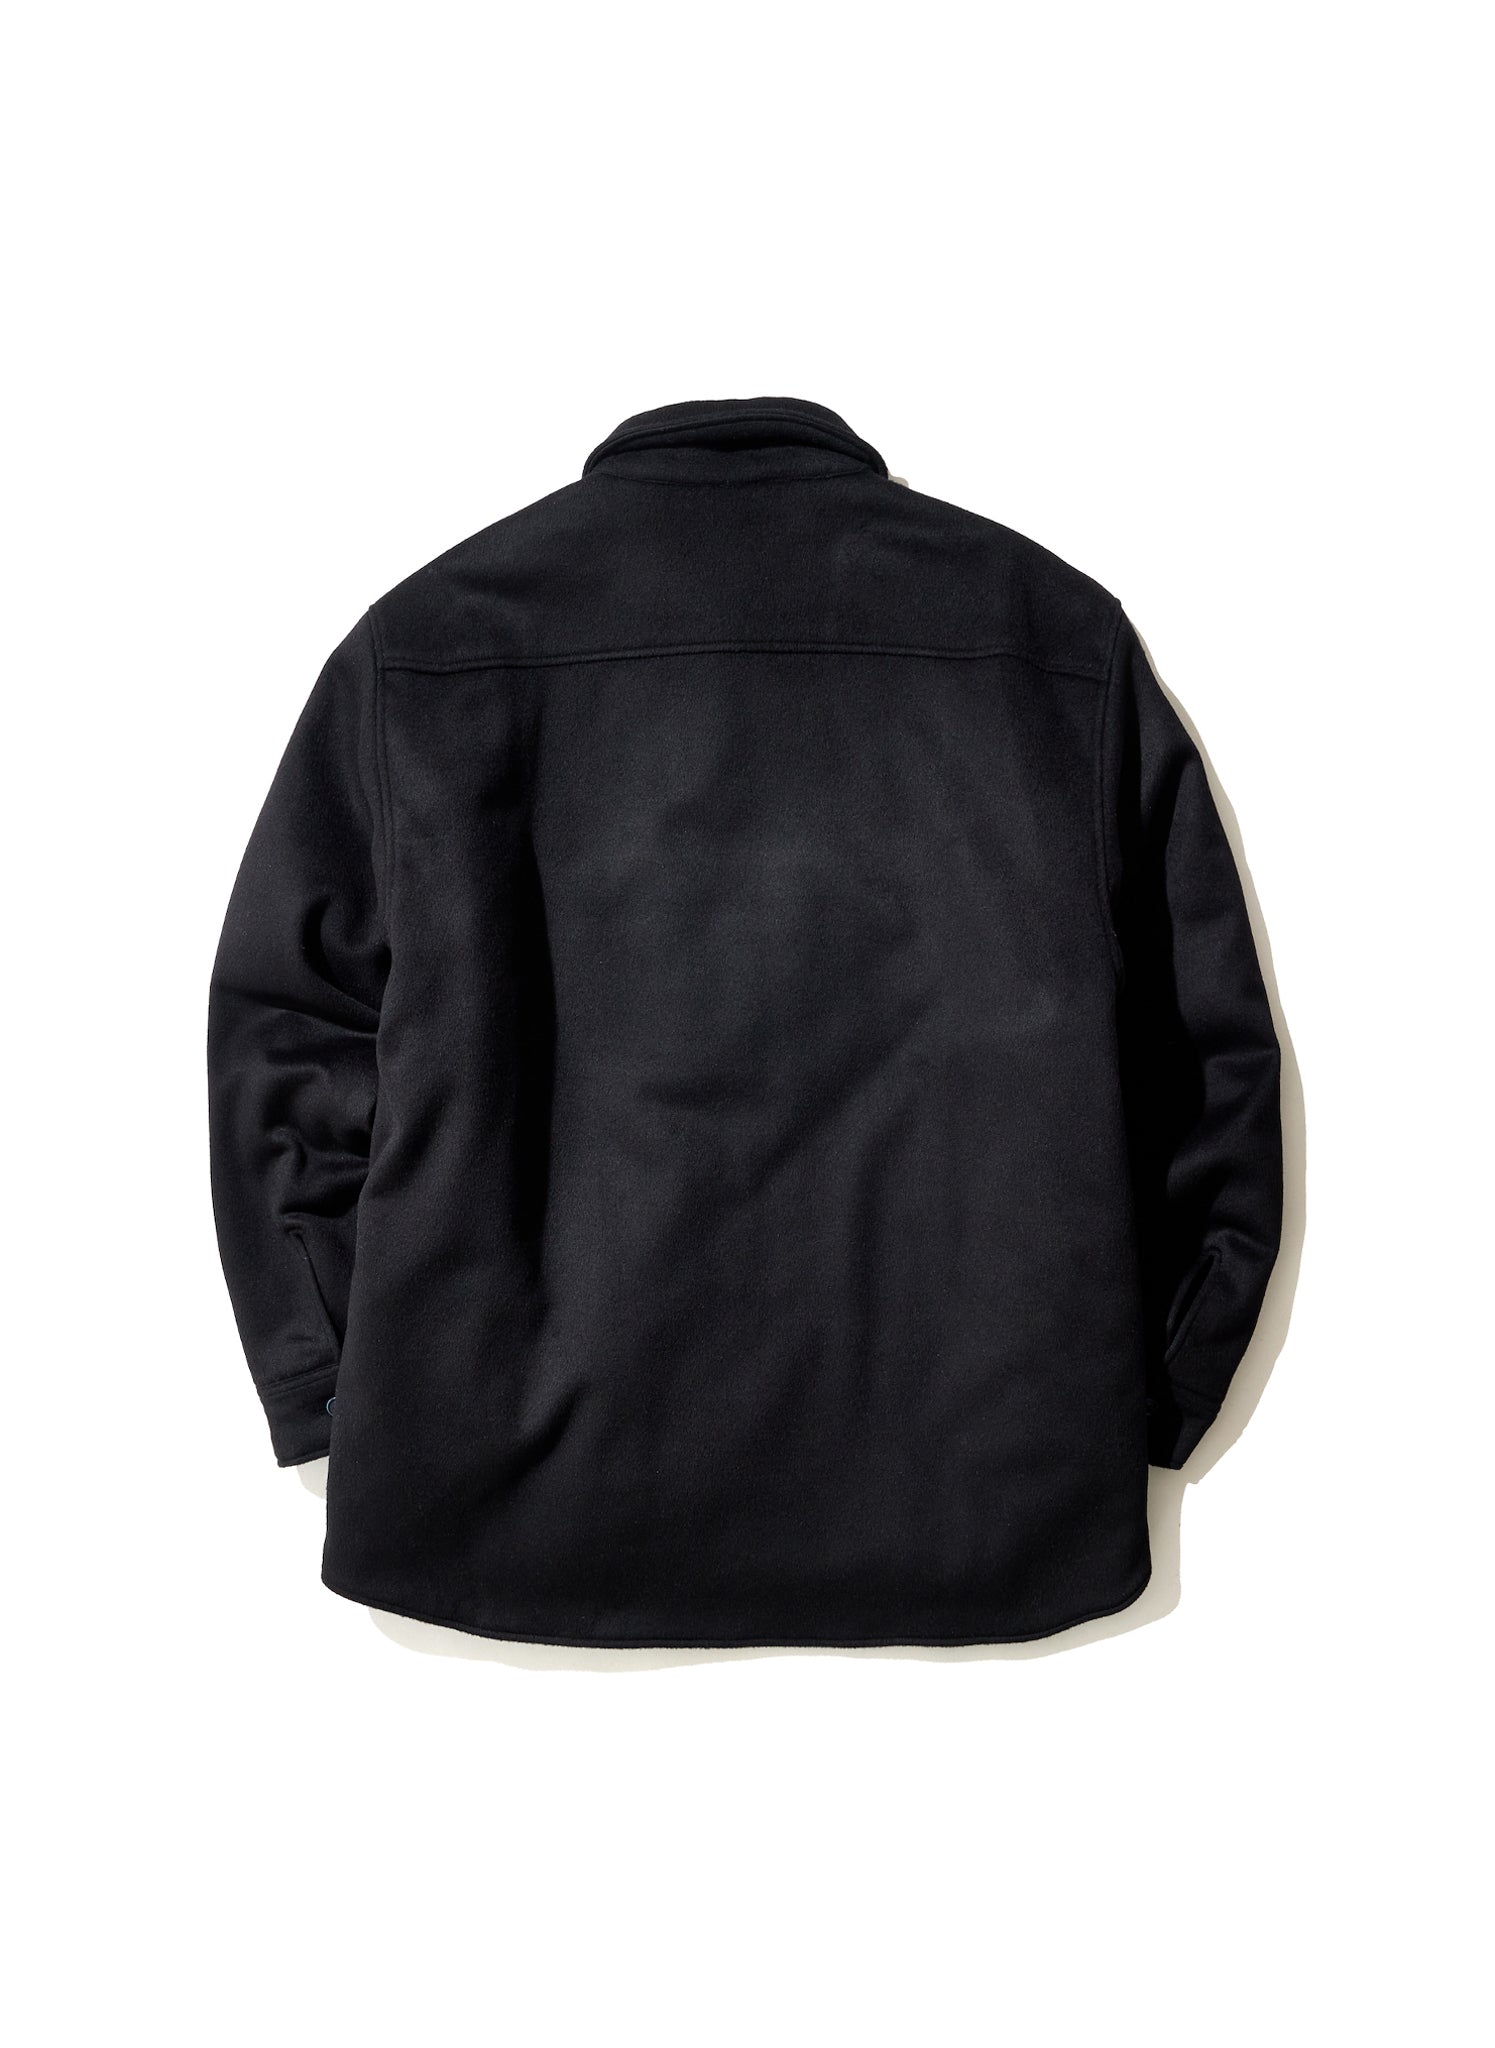 Last One WILLY CHAVARRIA / WOOL QUILTED SHIRT JACKET BLACK